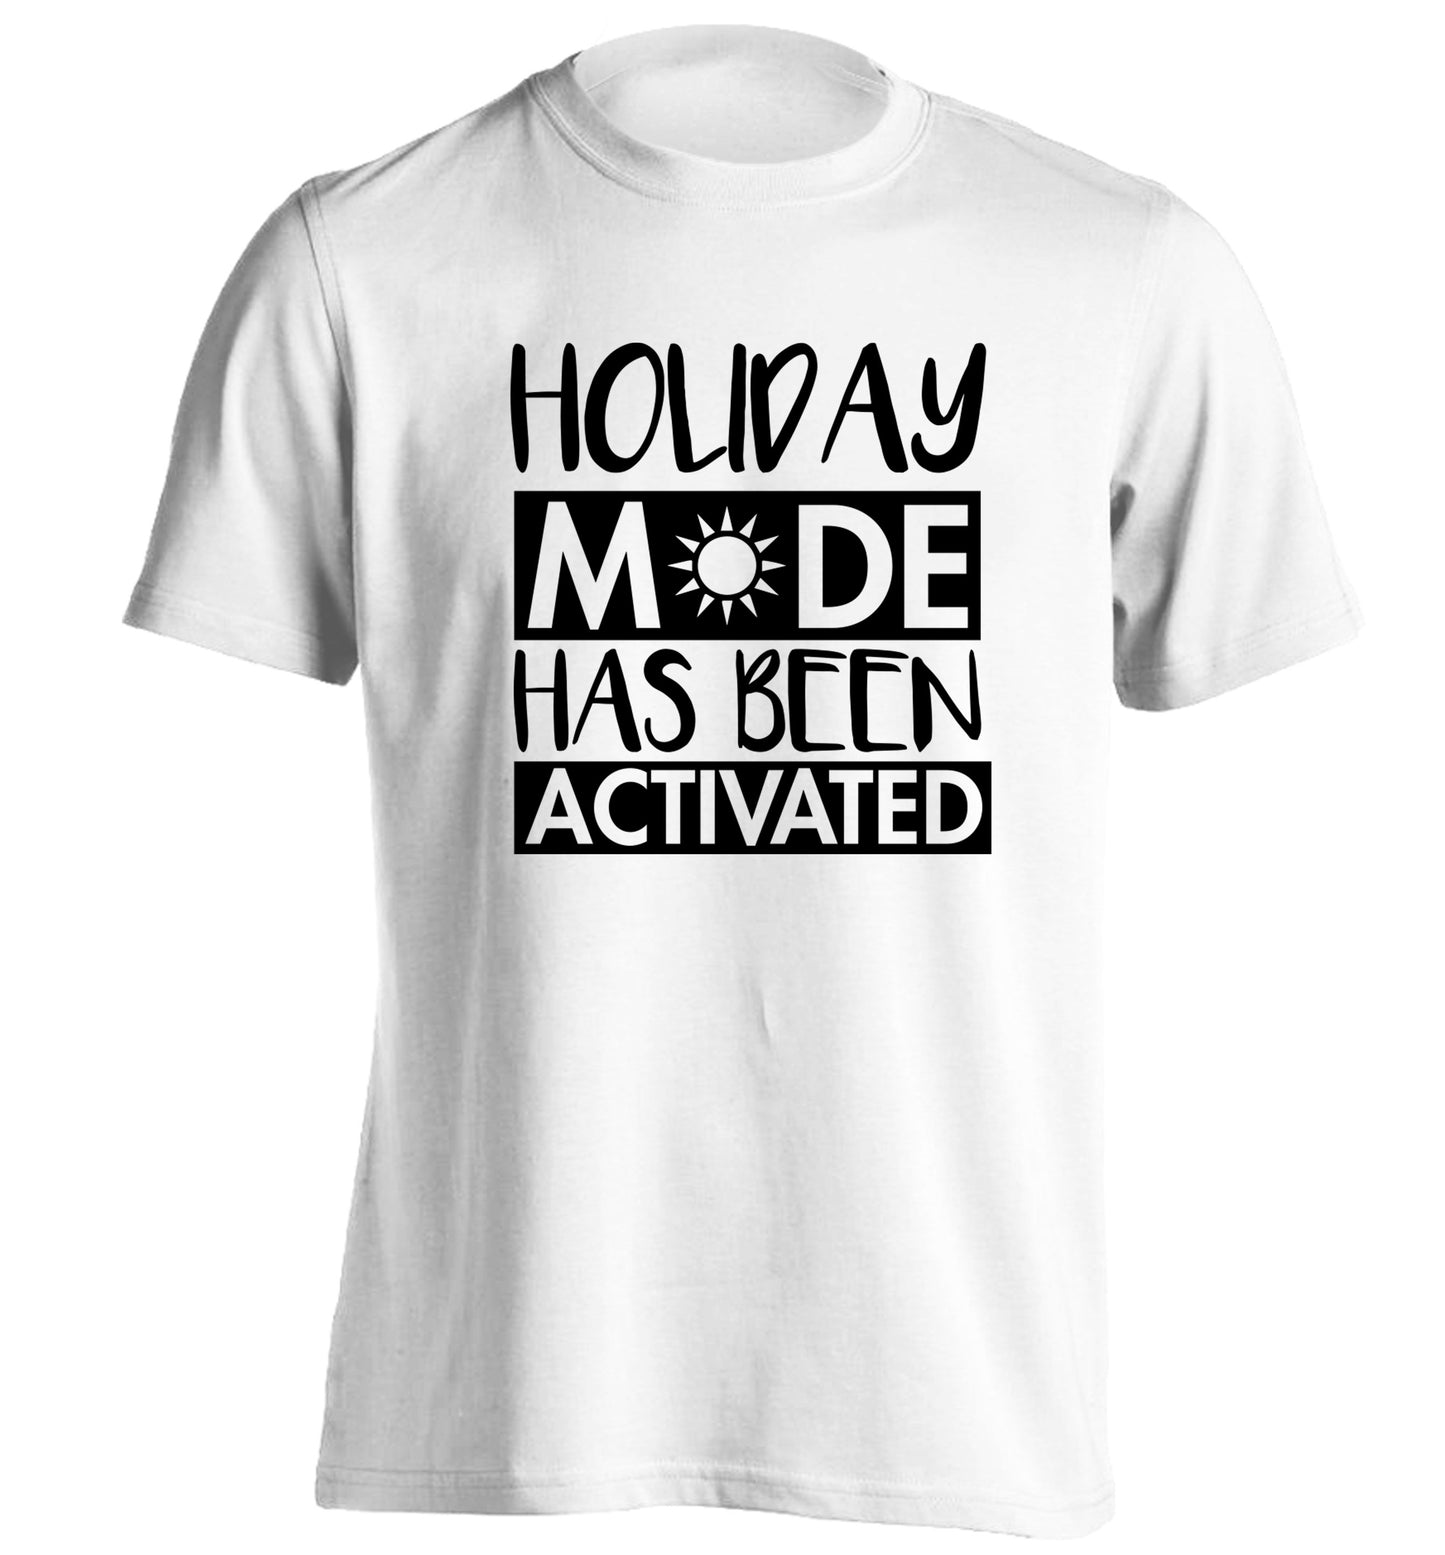 Holiday mode has been activated adults unisex white Tshirt 2XL